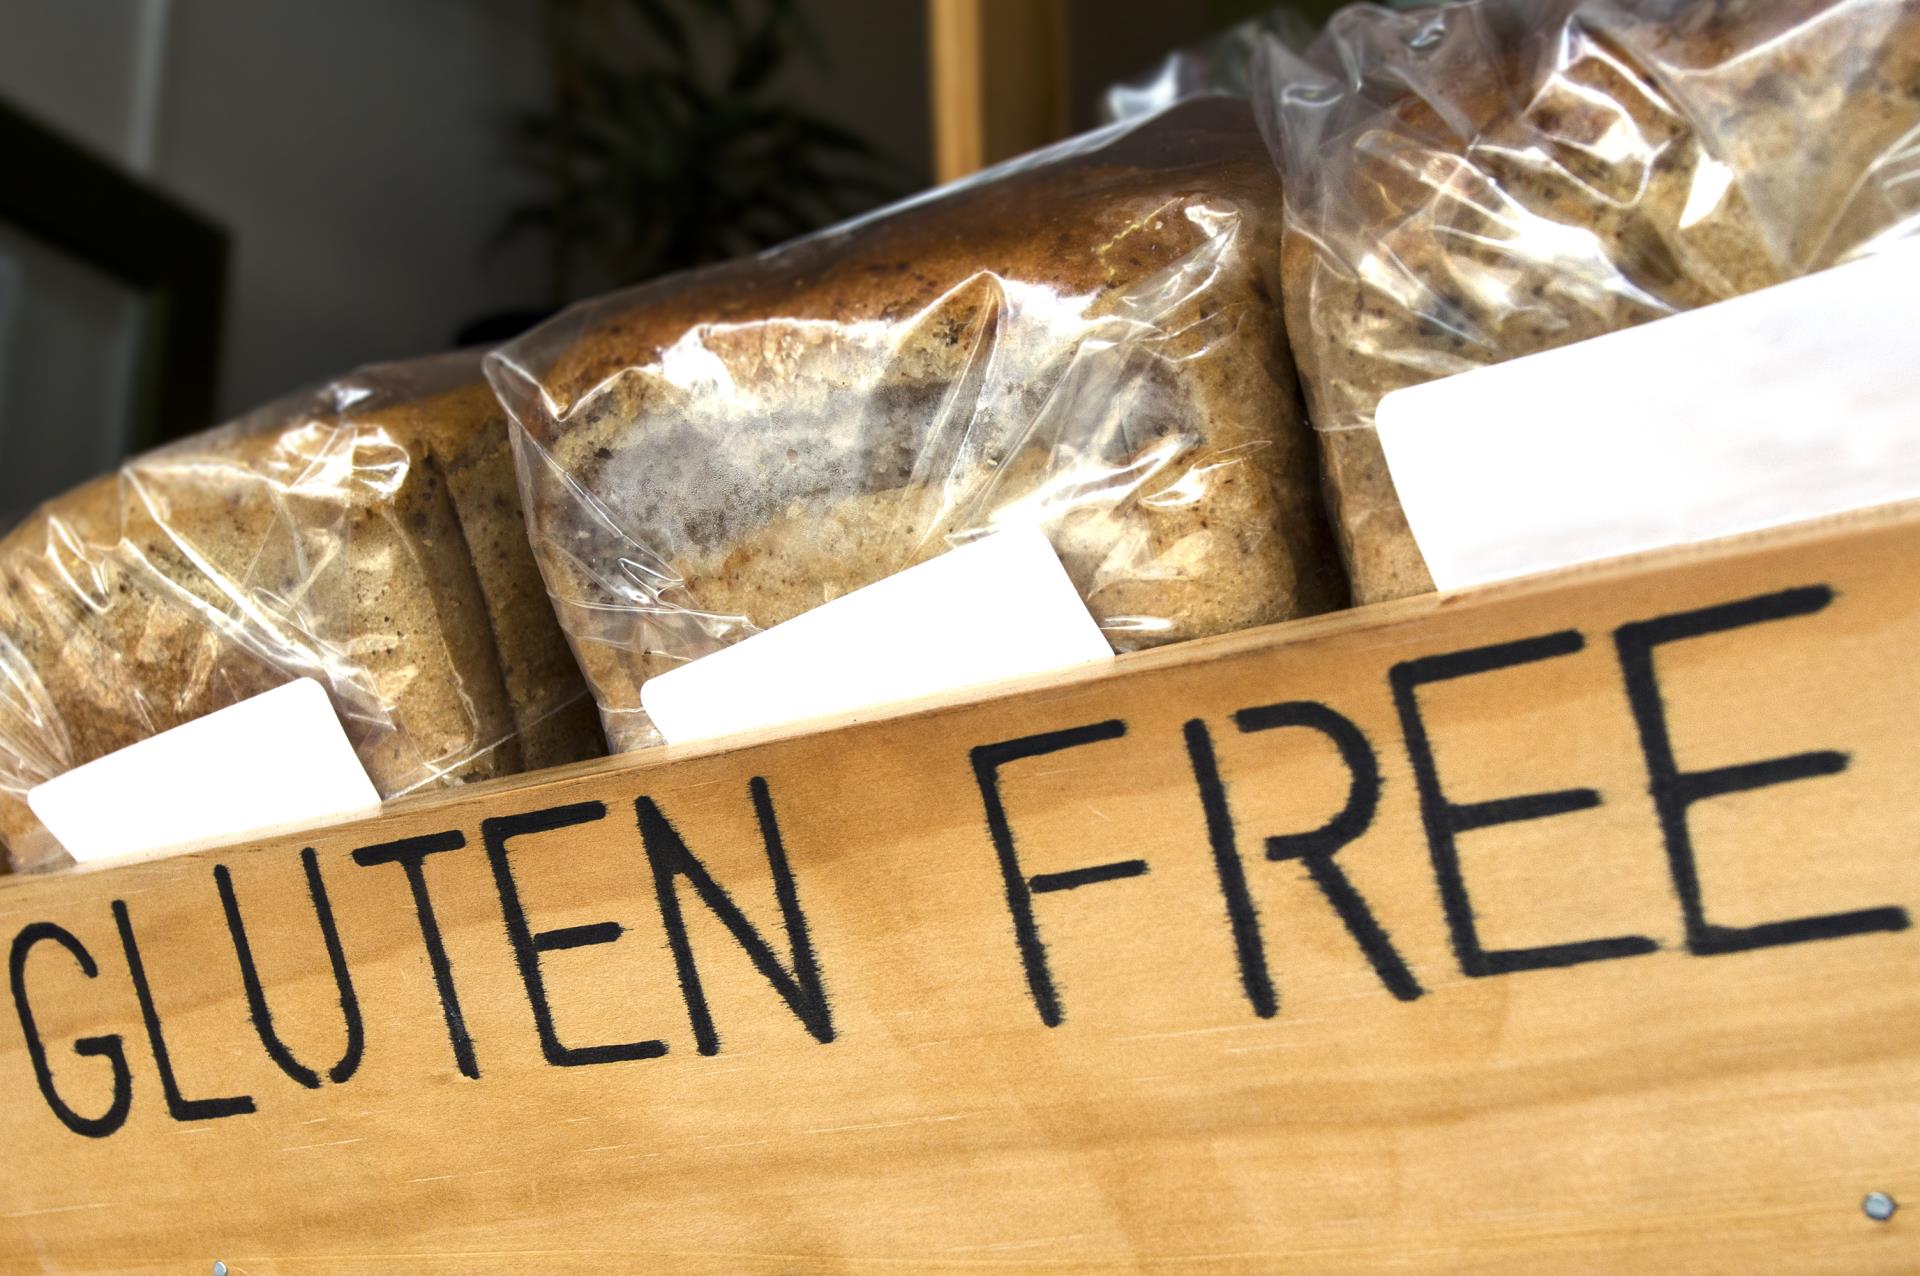 Loaves of bread with a sign marking them as gluten free